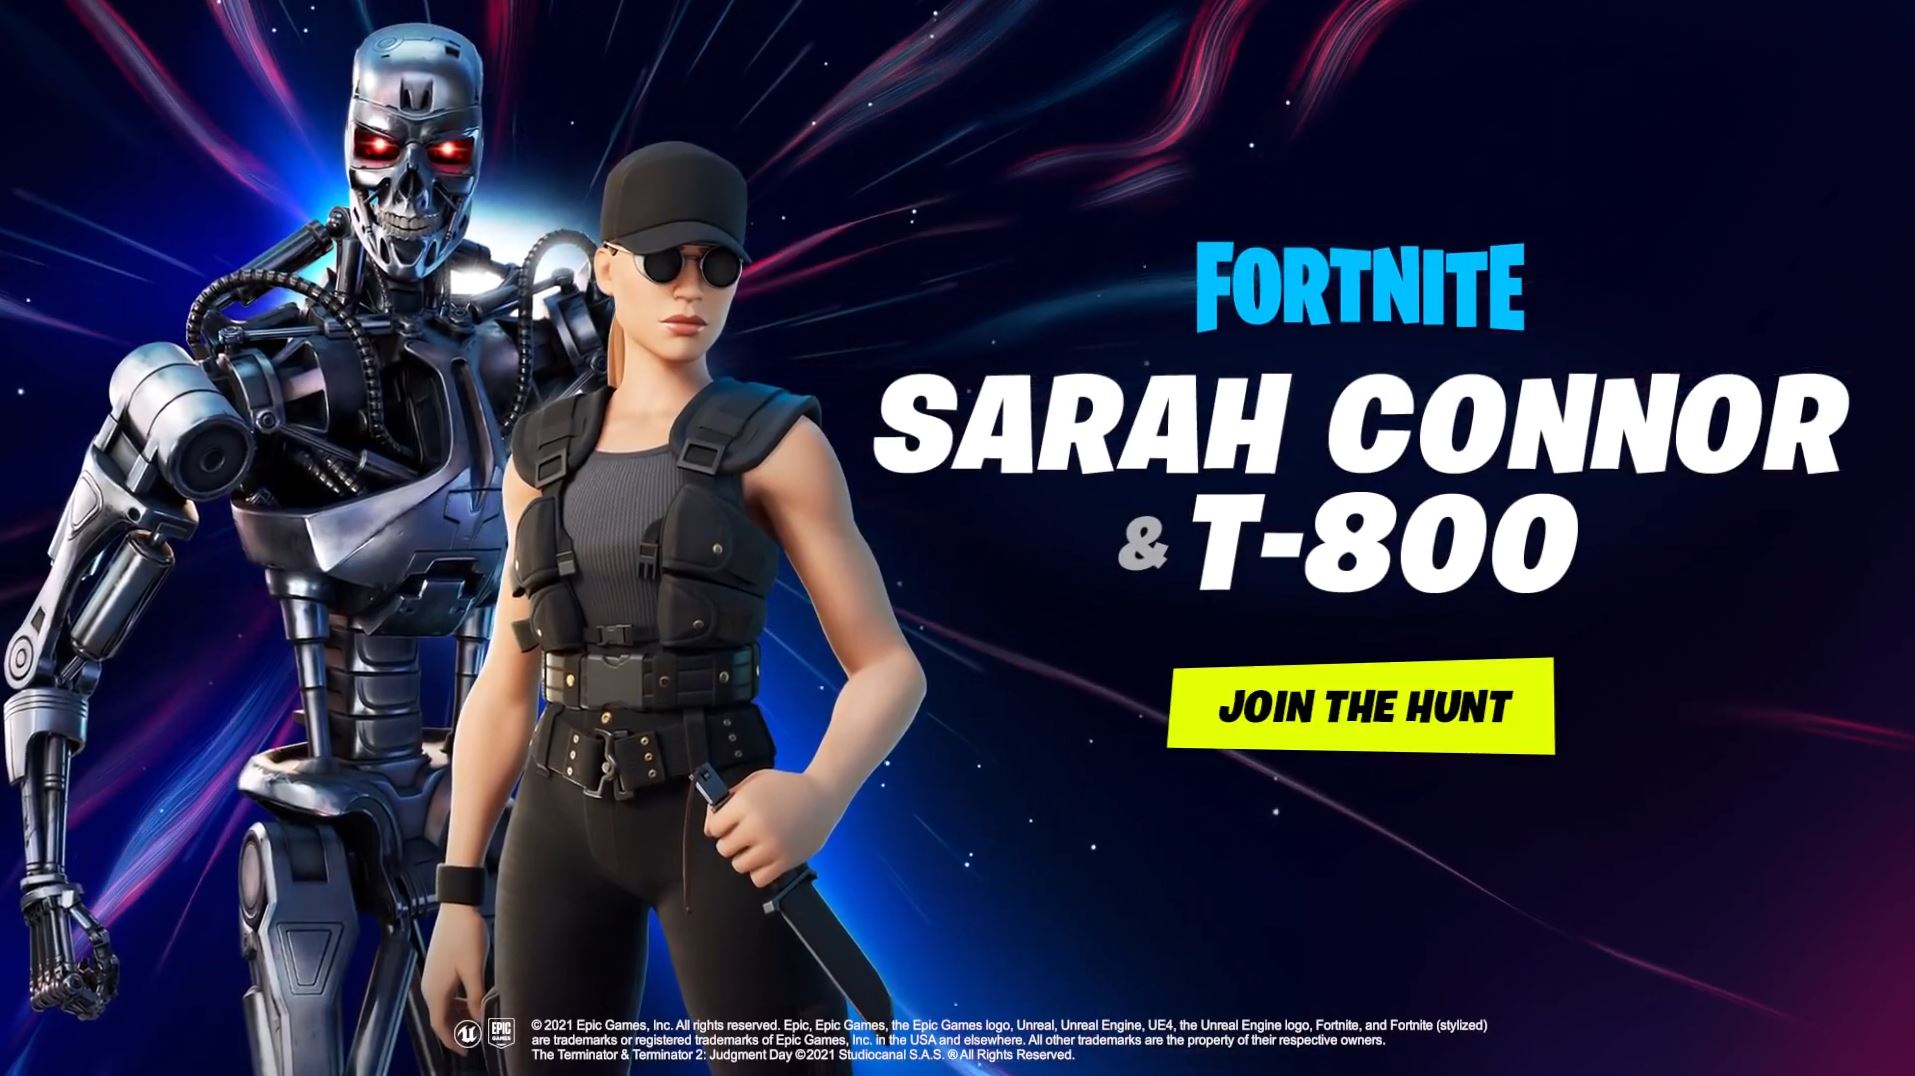 fortnite-adds-sarah-connor-and-t-800-to-the-item-shop-available-now-for-limited-time-on-ps5-and-ps4